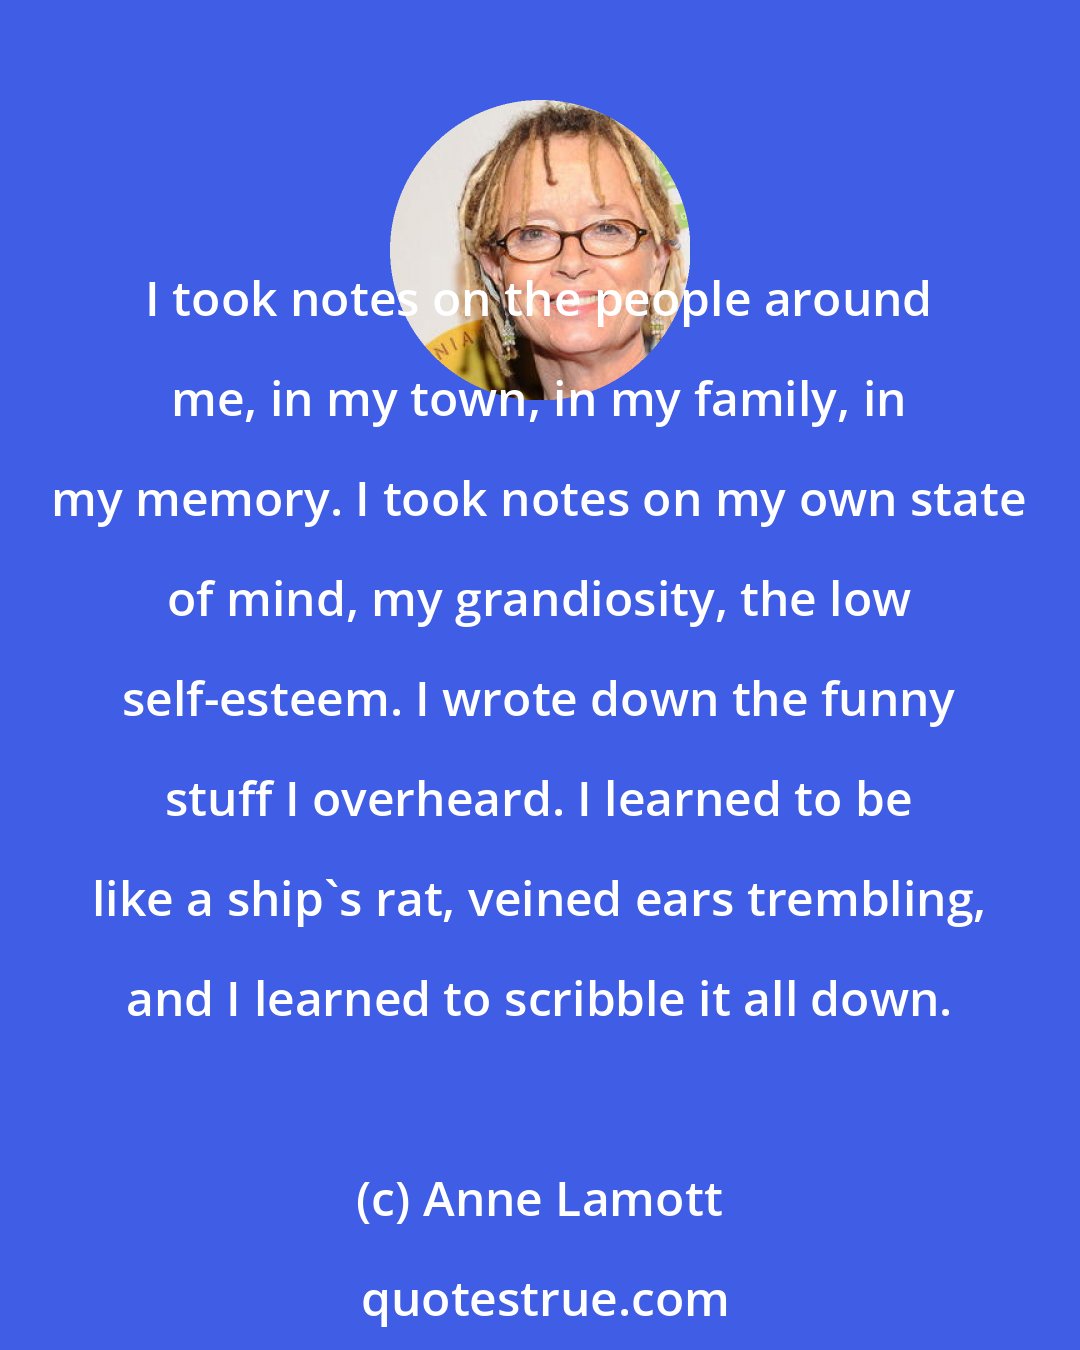 Anne Lamott: I took notes on the people around me, in my town, in my family, in my memory. I took notes on my own state of mind, my grandiosity, the low self-esteem. I wrote down the funny stuff I overheard. I learned to be like a ship's rat, veined ears trembling, and I learned to scribble it all down.